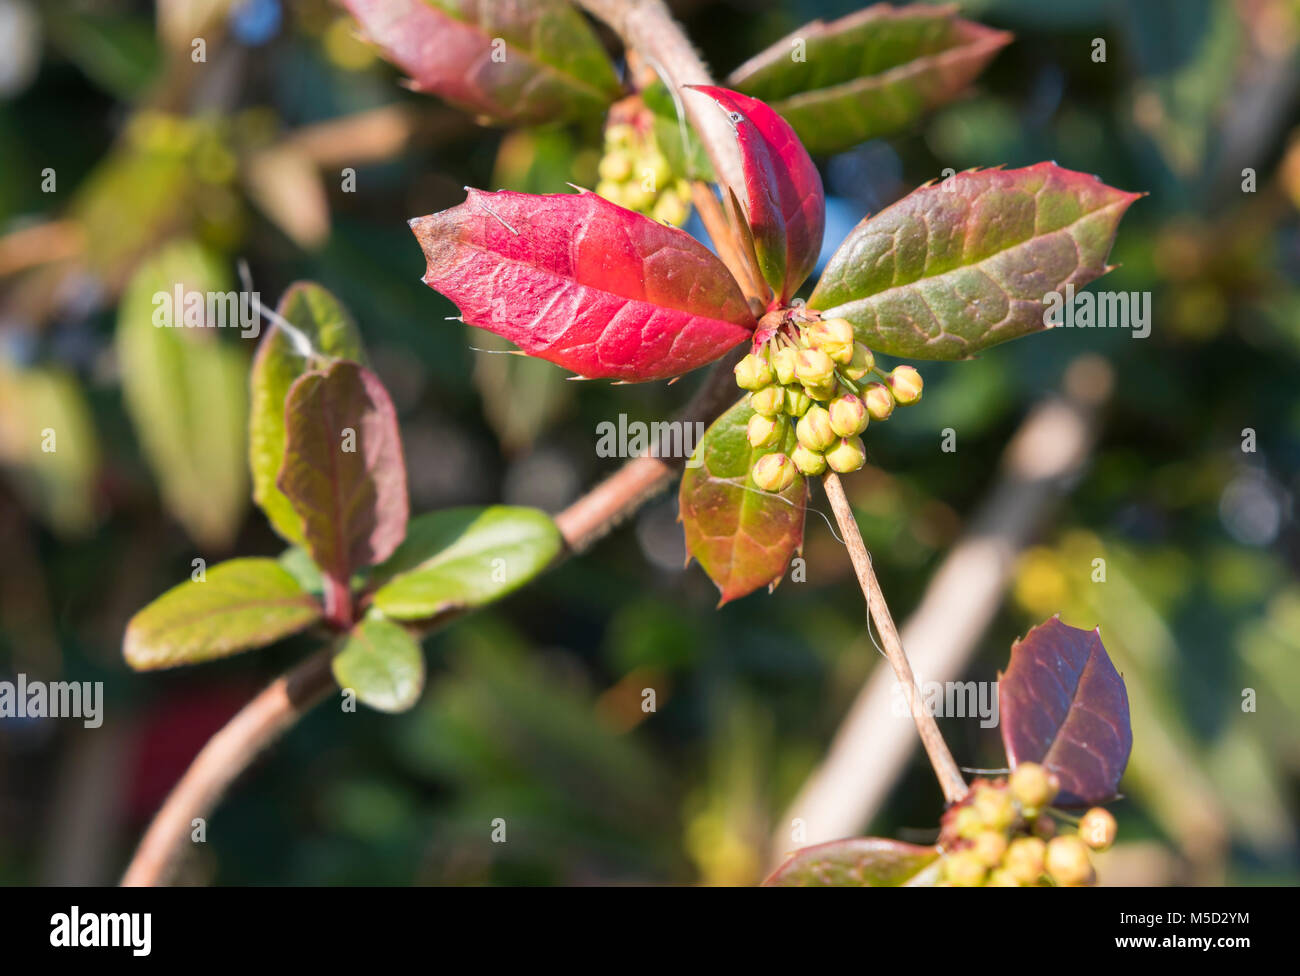 Berberis julianae, an ornamental evergreen Barberry with small yellow flowers growing in Winter in Southern England, UK. Stock Photo